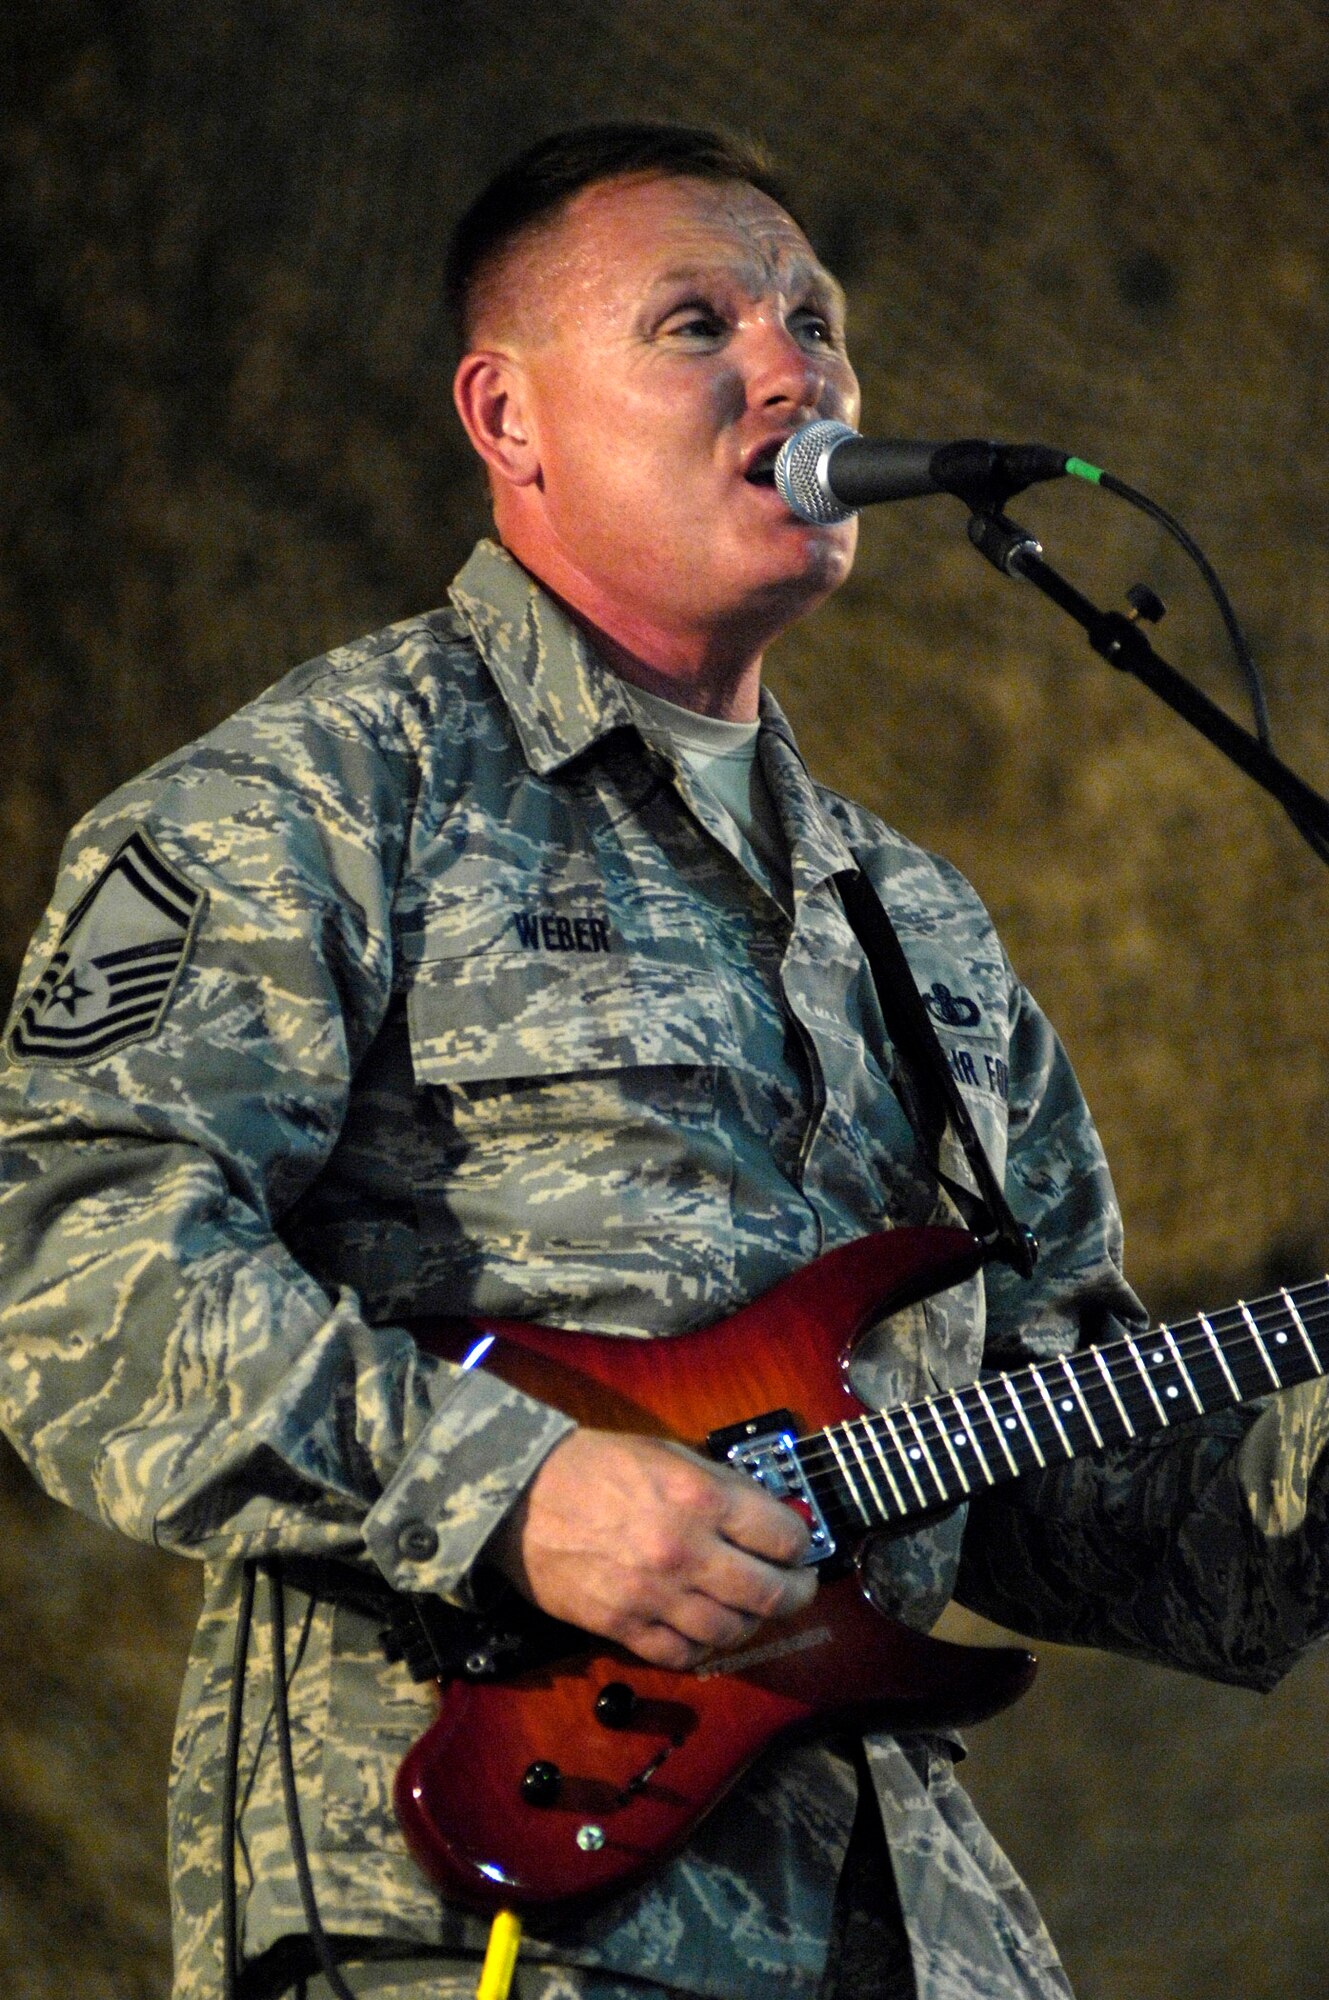 Senior Master Sgt. James Weber sings during a show June 22 at Bagram Air Base, Afghanistan. The U.S. Air Forces Central Band "Falcon" band travels throughout the area of responsibility to promote troop morale and to reach out to host nation communities. General Holmes is the 455th Air Expeditionary Wing commander. Sergeant Weber is the band's vocalist and guitarist. (U.S. Air Force photo/Master Sgt. Demetrius Lester) 
